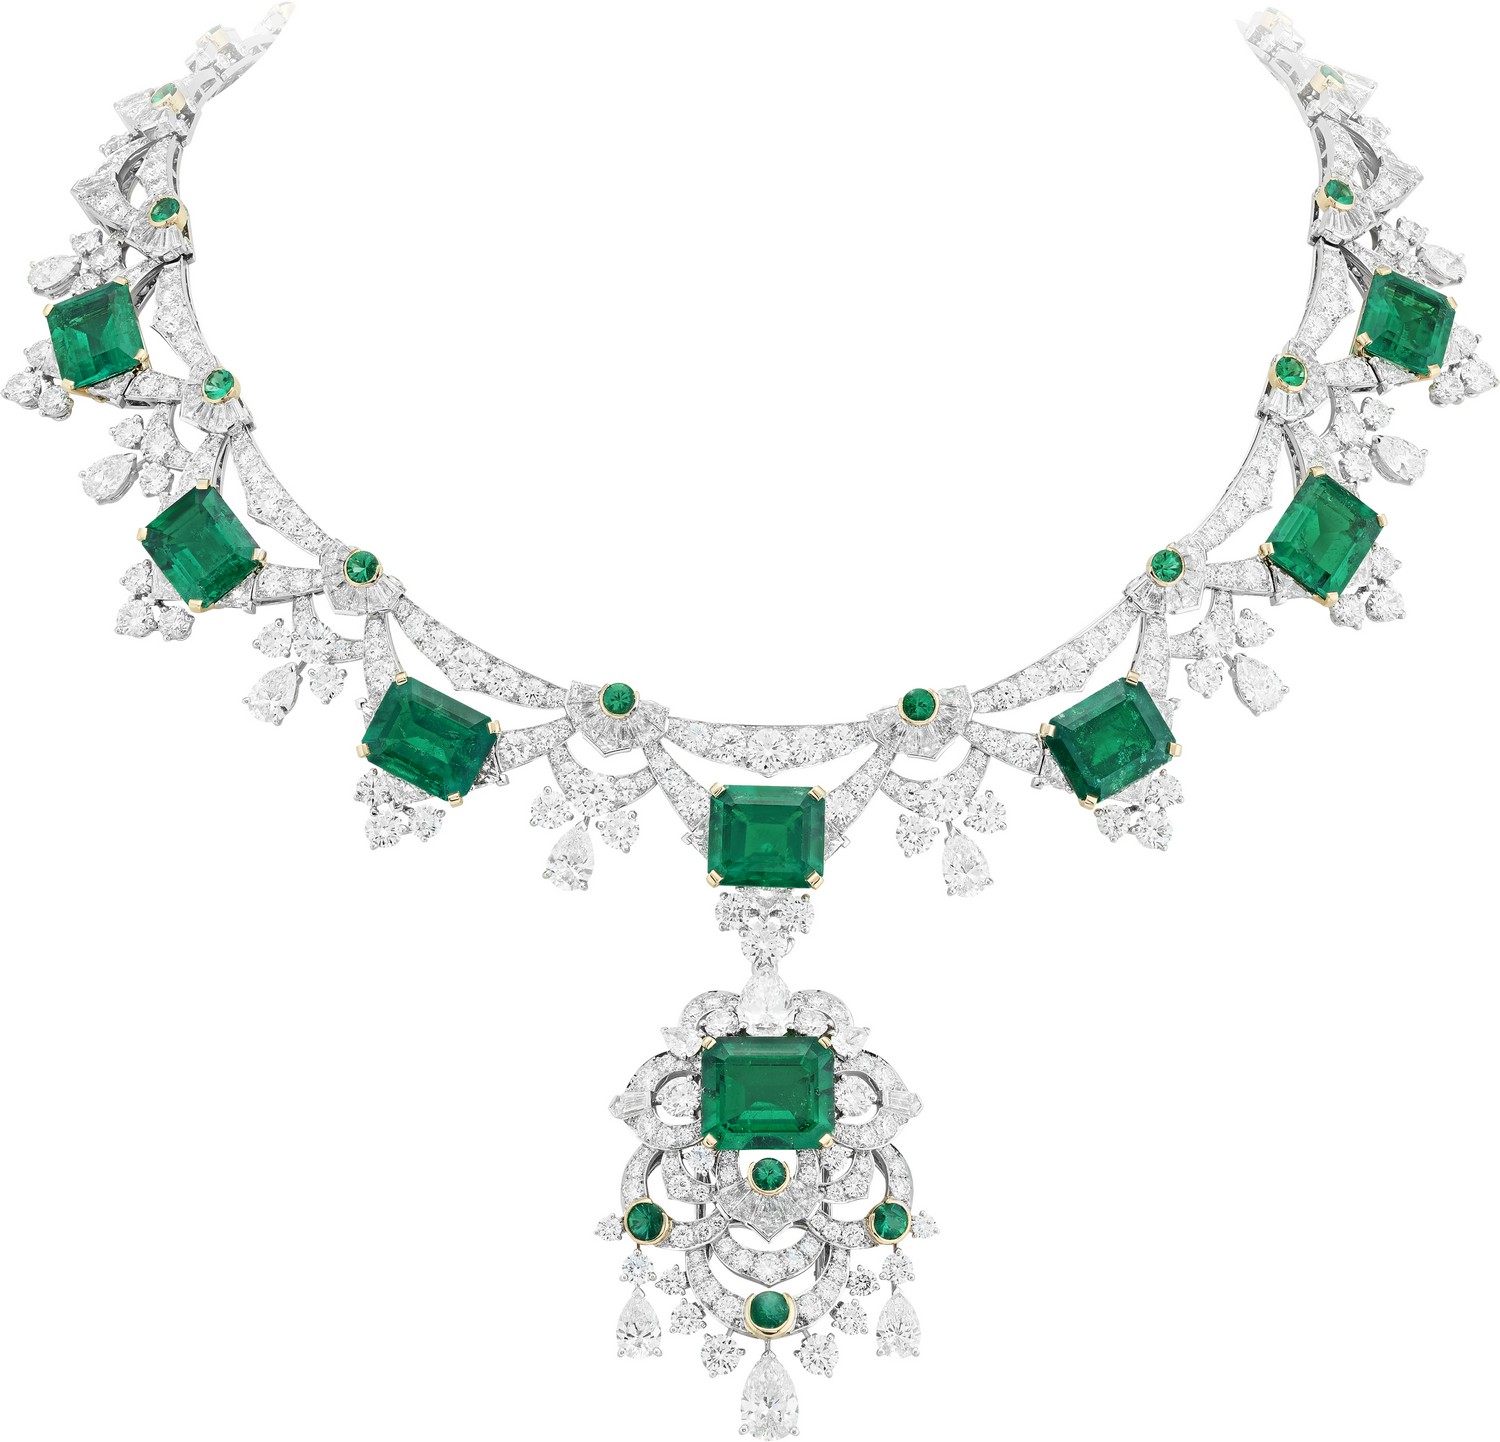 White gold, yellow gold, round, tapered-cut, triangle-cut, baguette-cut and pear-shaped diamonds, buff-topped round emeralds, 9 emerald-cut emeralds for a total of 42.07 carats (Colombia). Detachable clip. 